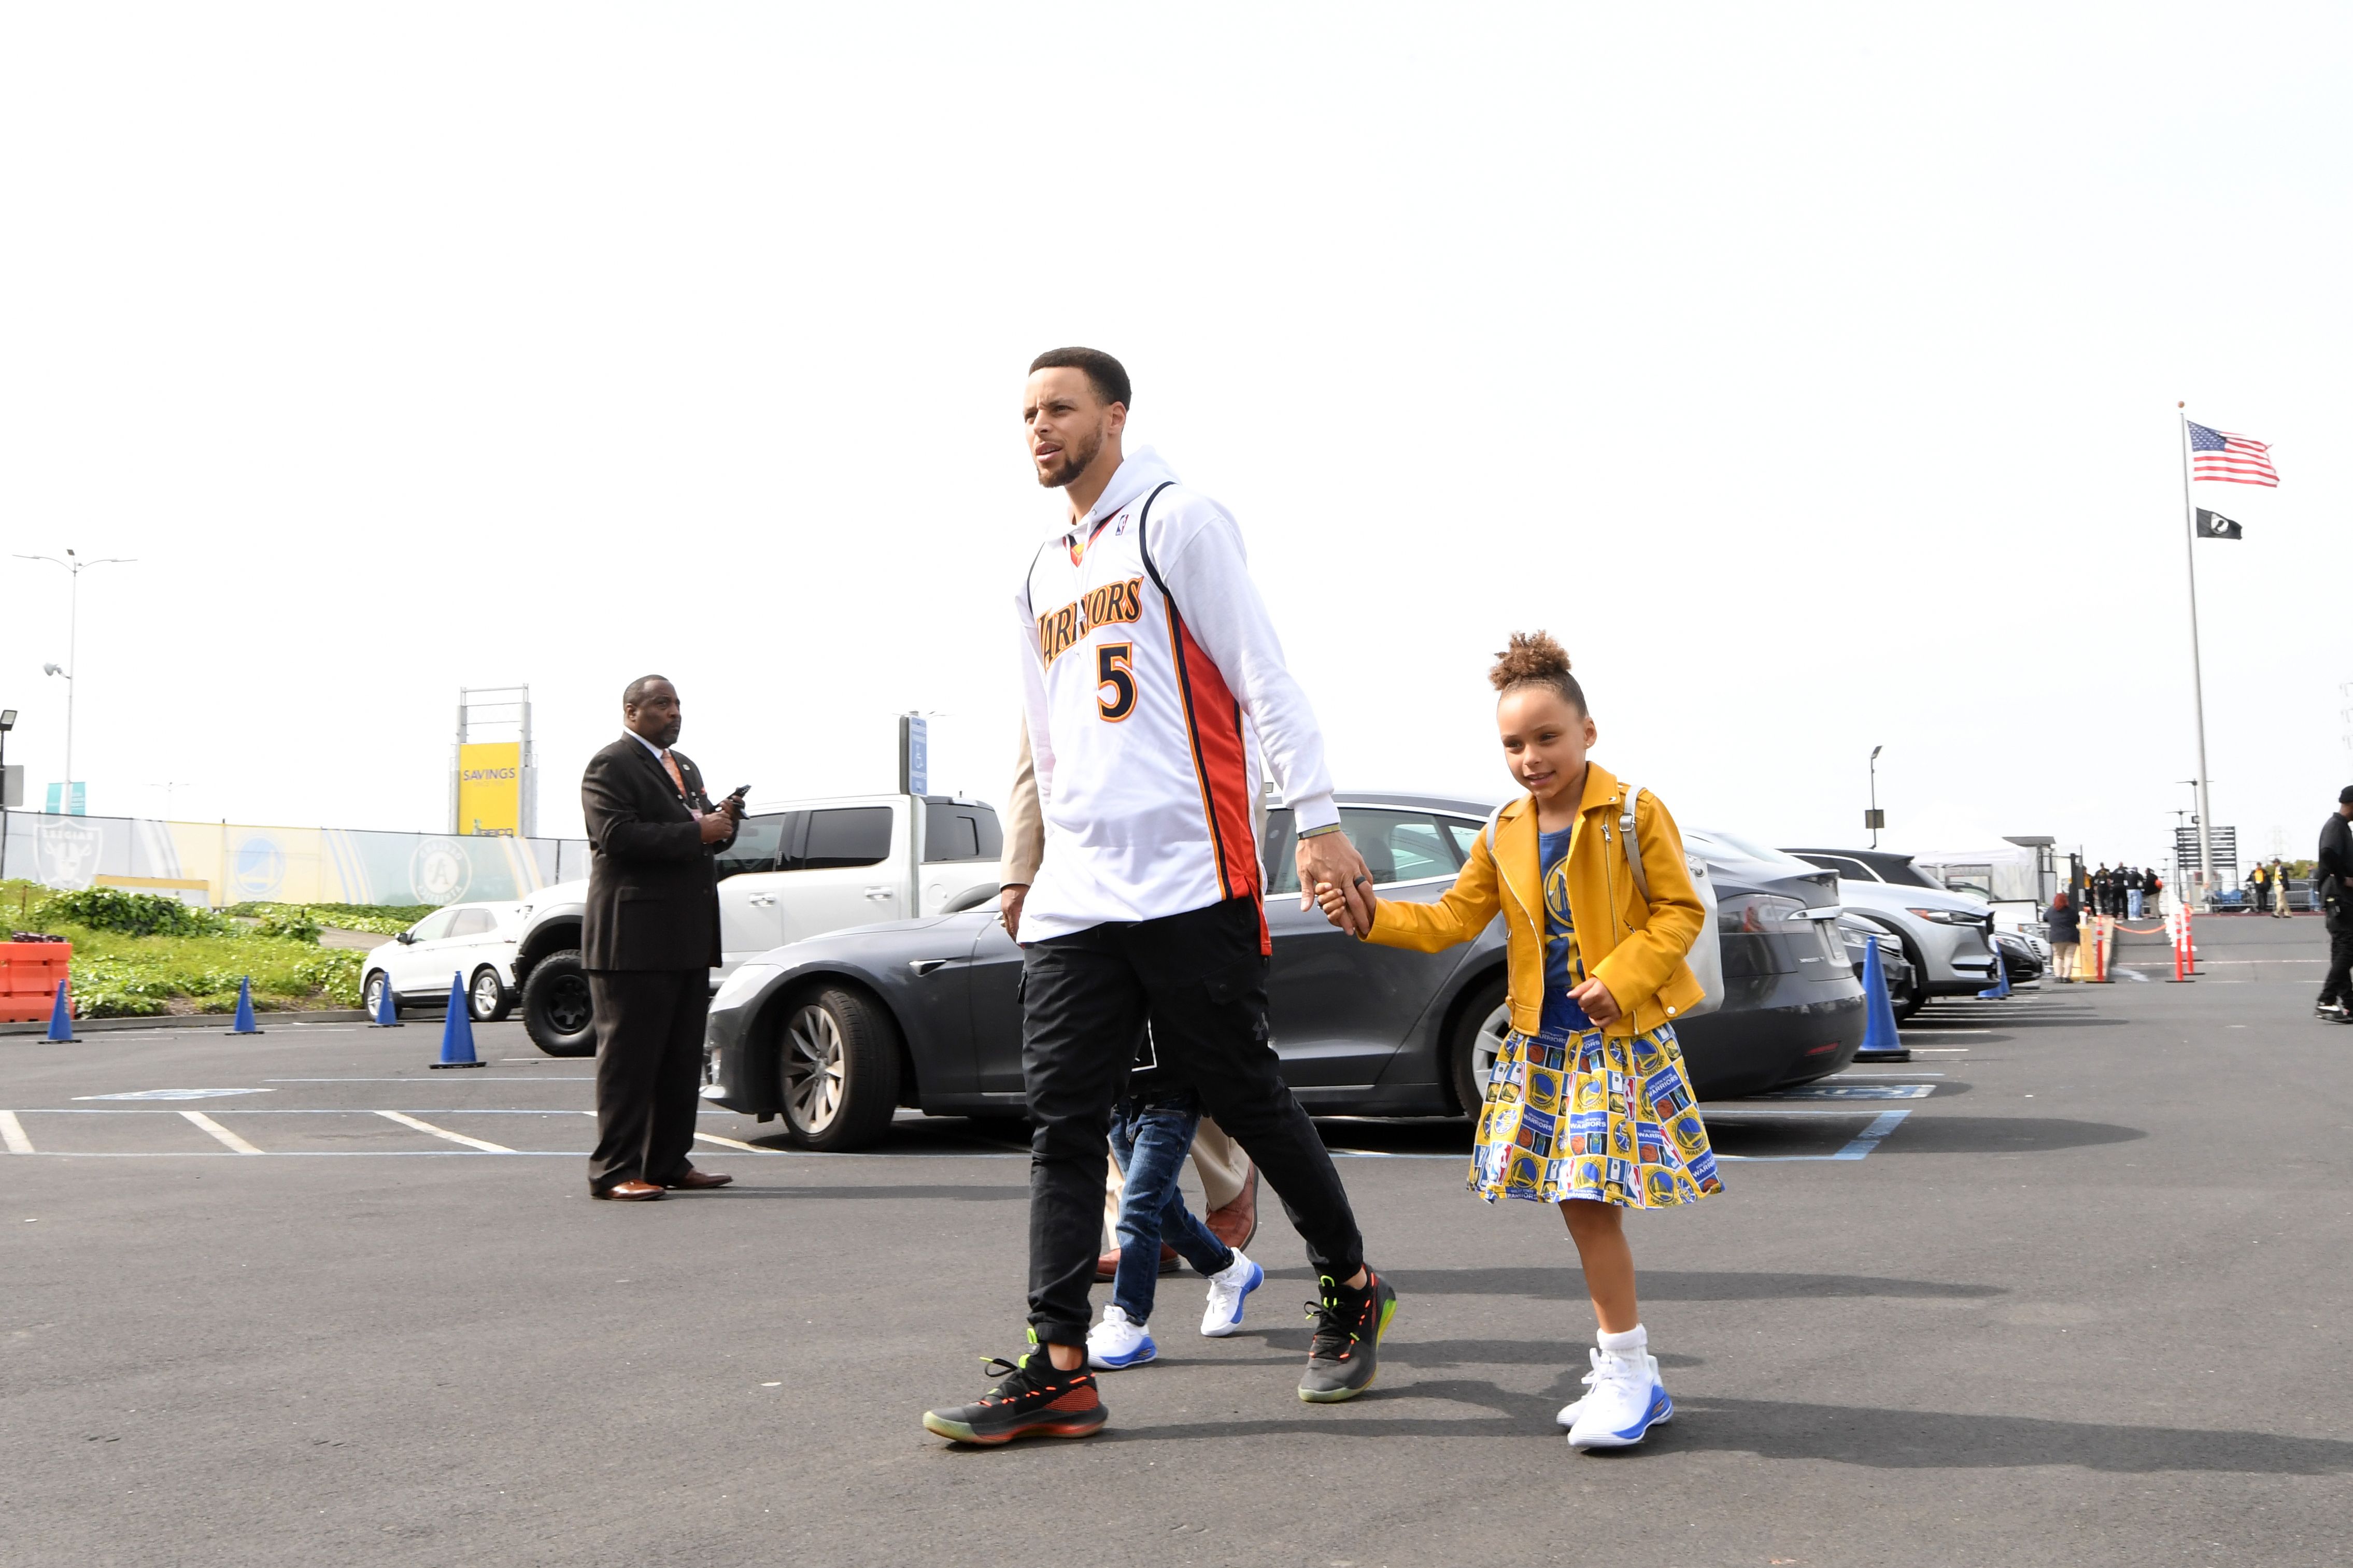 Riley Curry sings 'Happy Birthday' to Stephen Curry (Video)